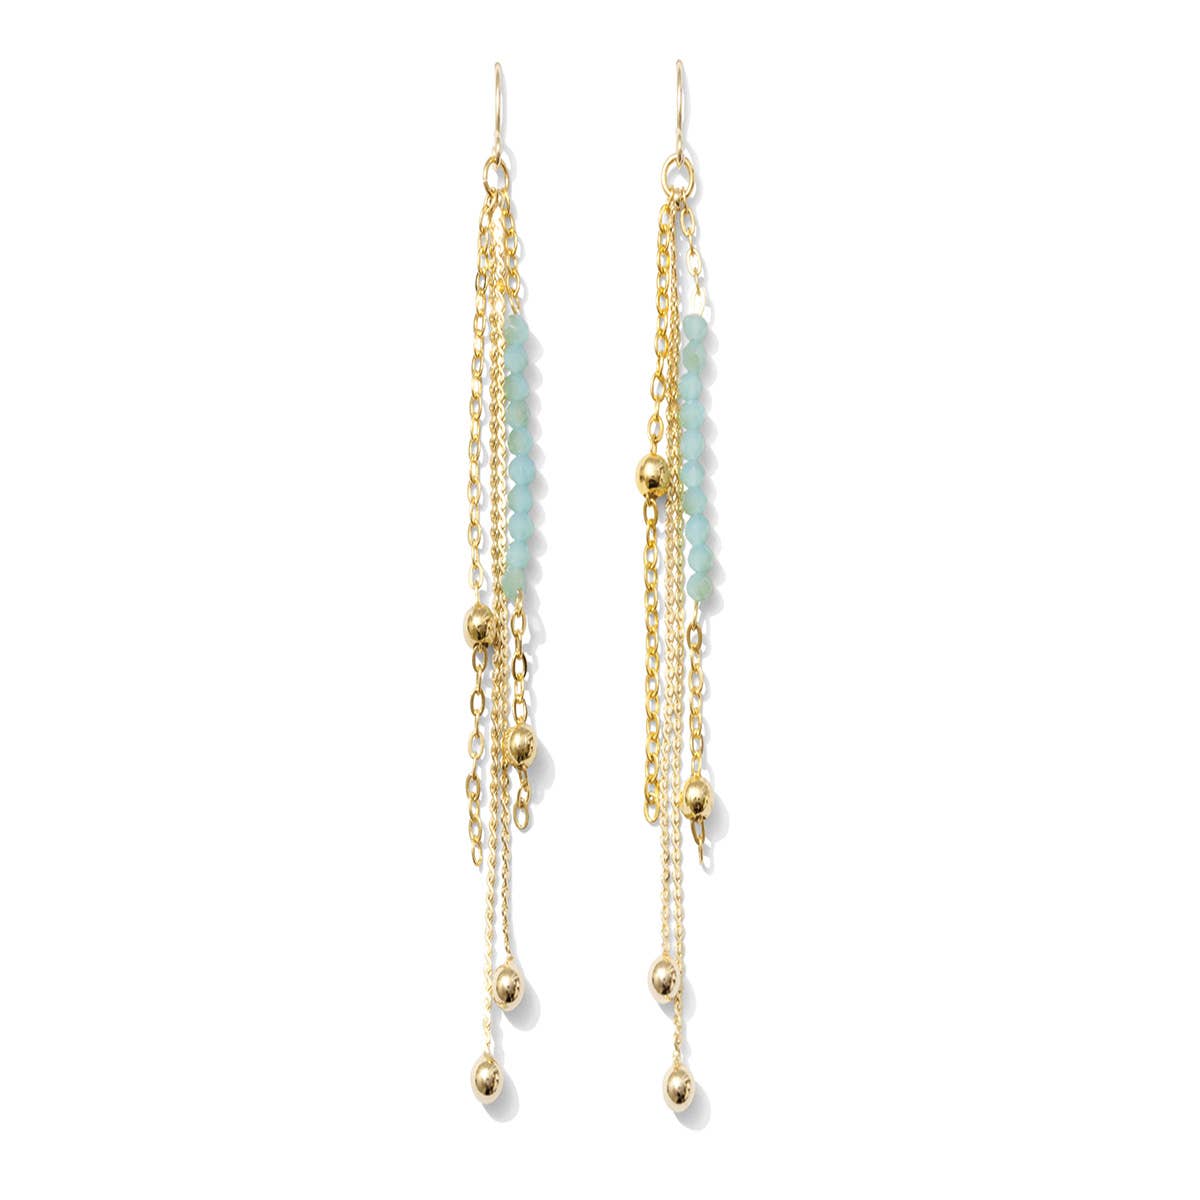 Gold & Aqua Long Earring with a Pop of Color